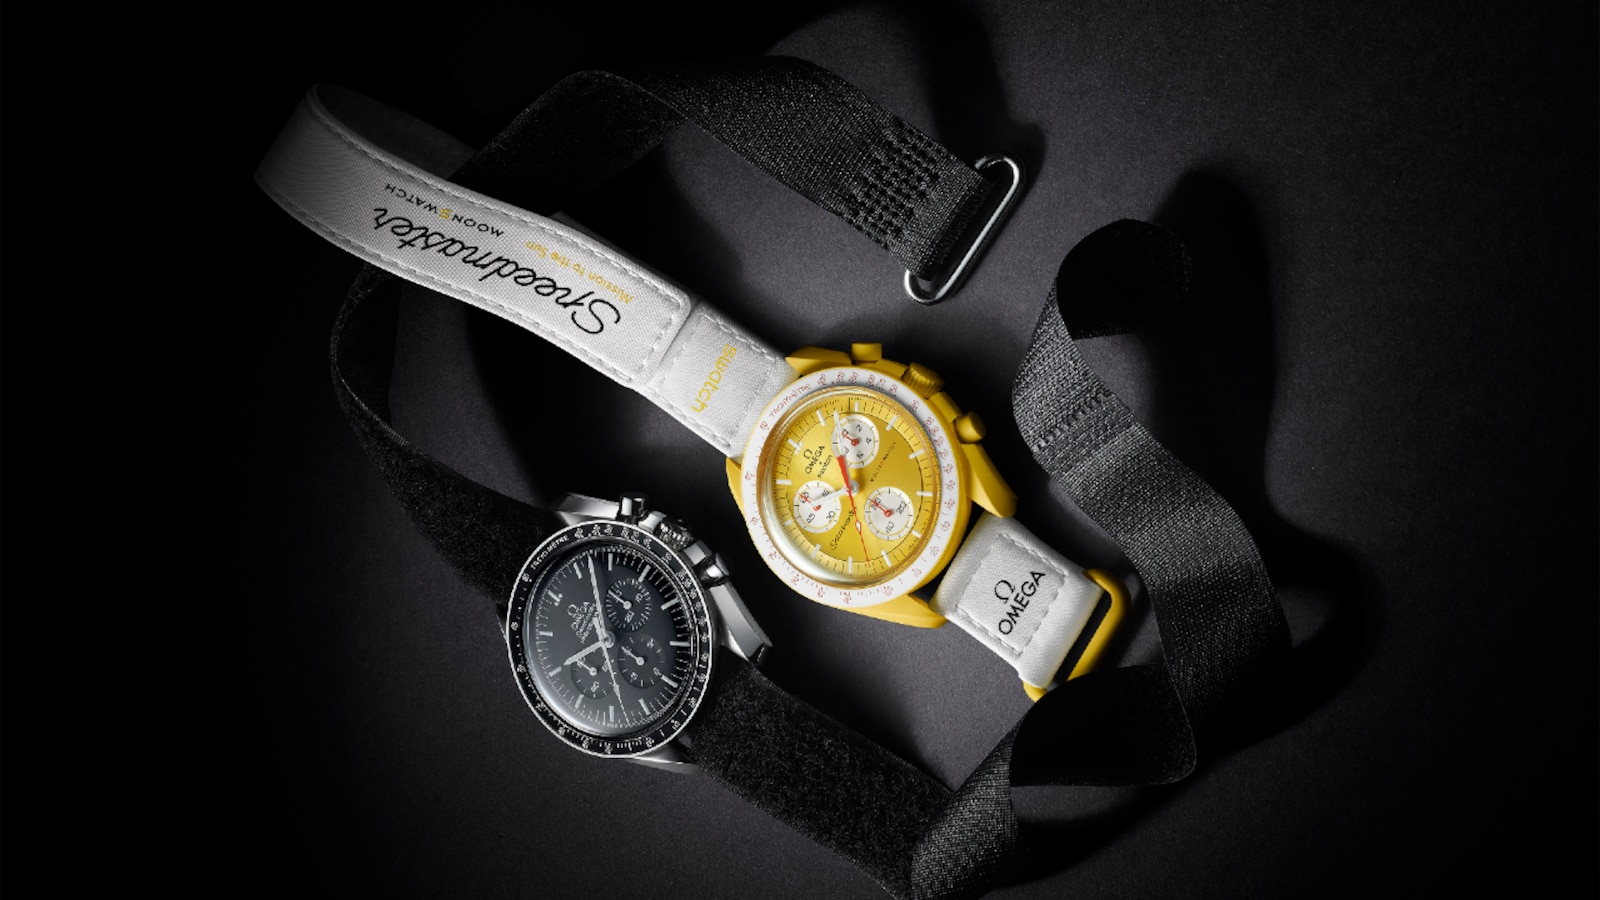 Swatch Omega MoonSwatch Revitalizes Swiss Watch Brand - Bloomberg